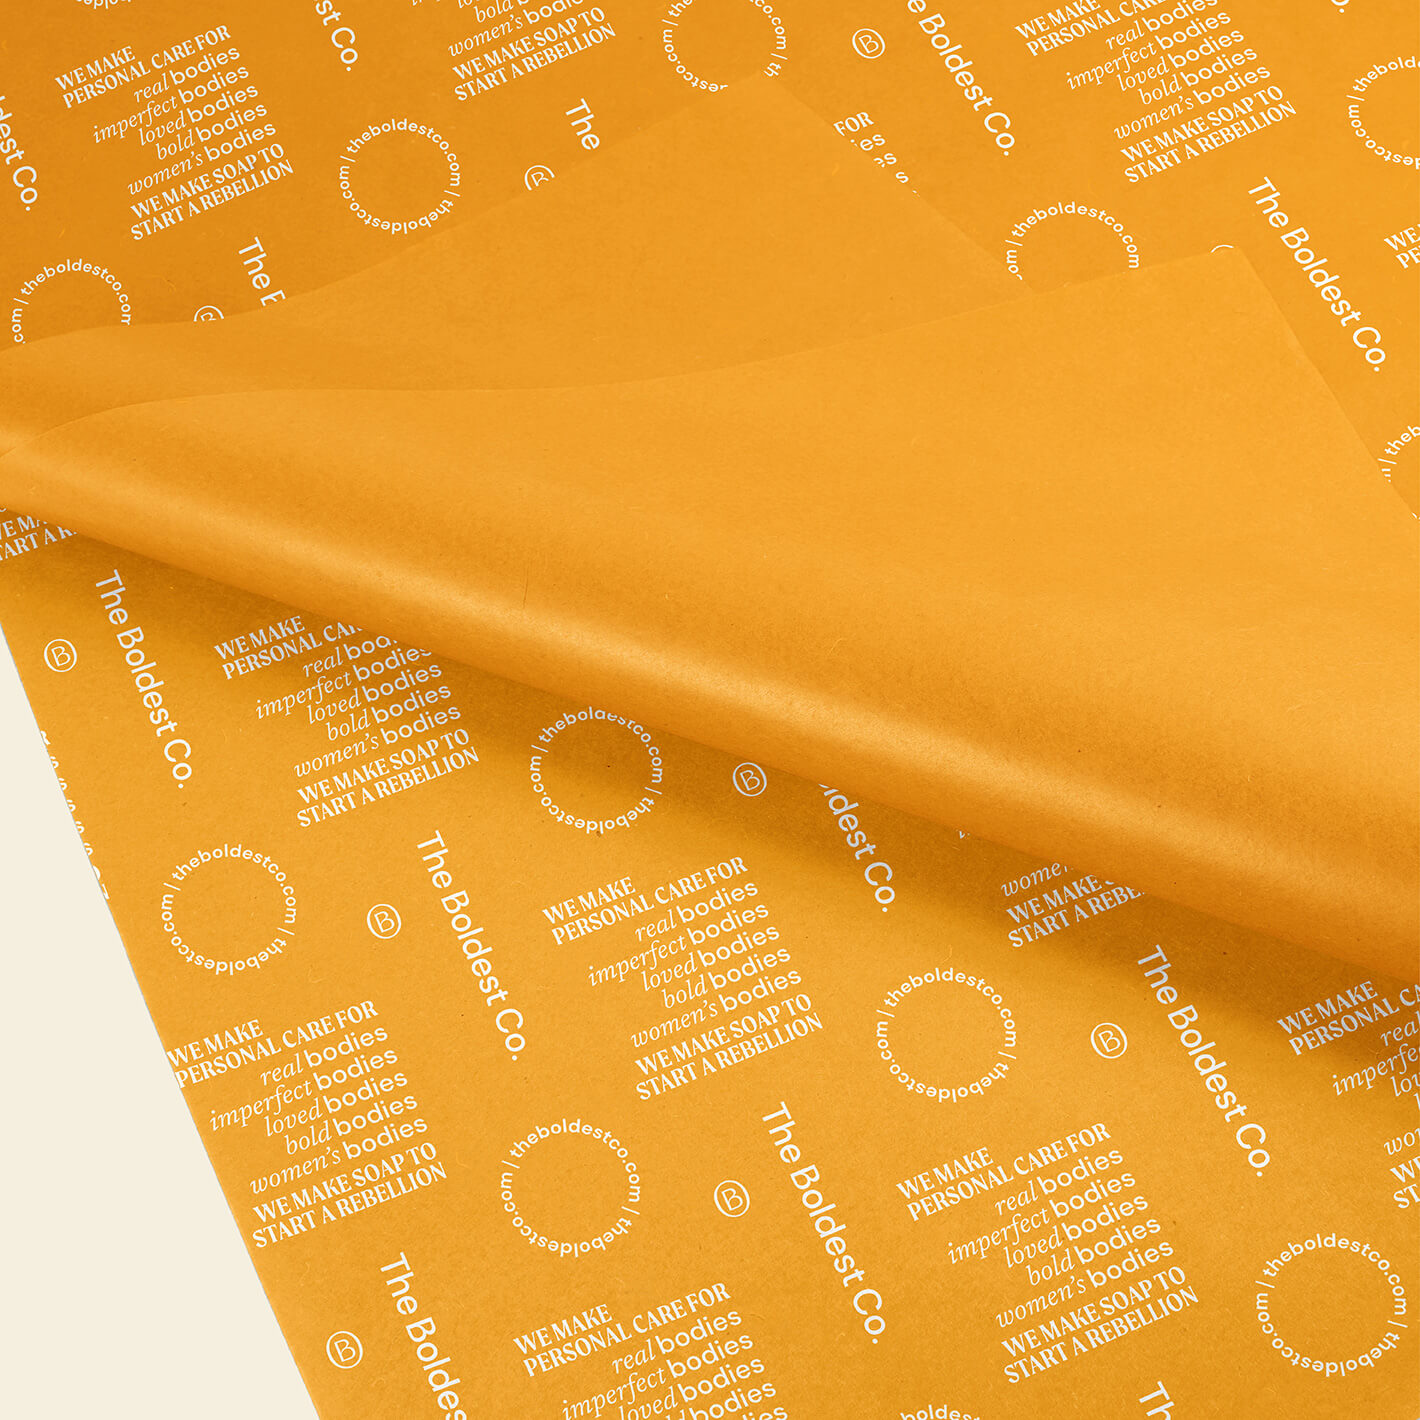 Brand design portfolio image of The Boldest Co’s bright yellow tissue paper. The brand’s values and supporting brand icons appear in white.